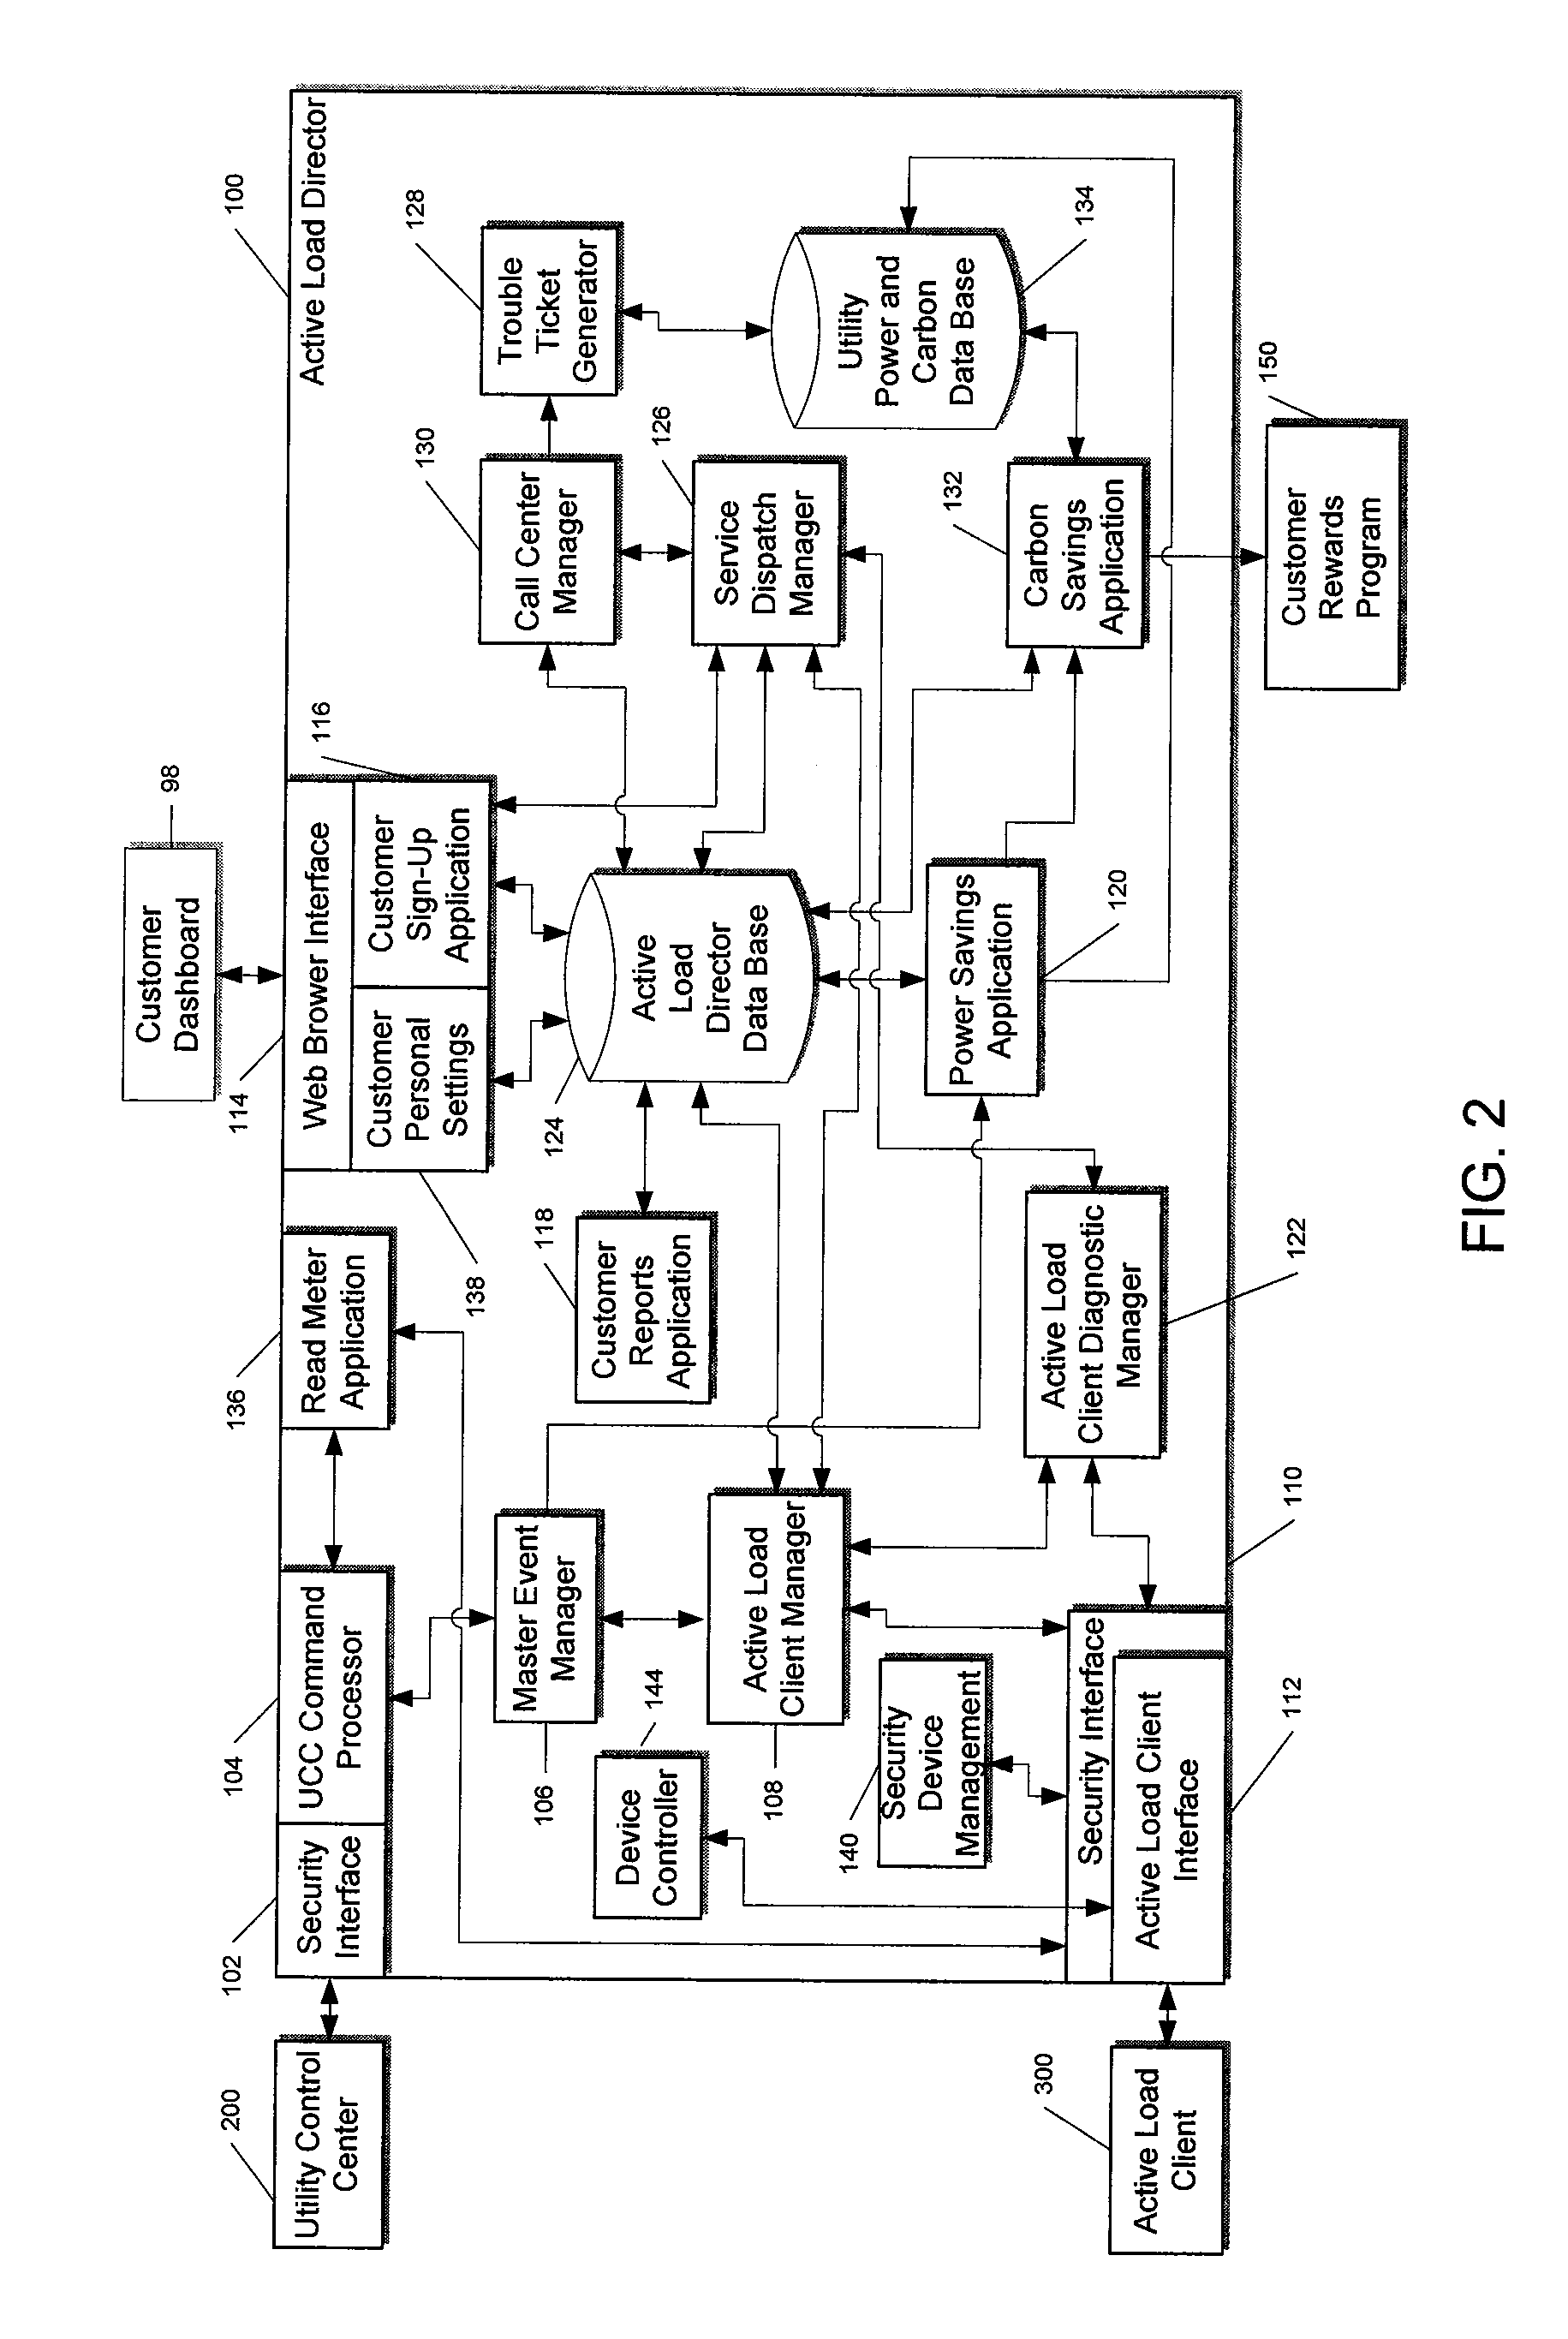 System and method for determining and utilizing customer energy profiles for load control for individual structures, devices, and aggregation of same